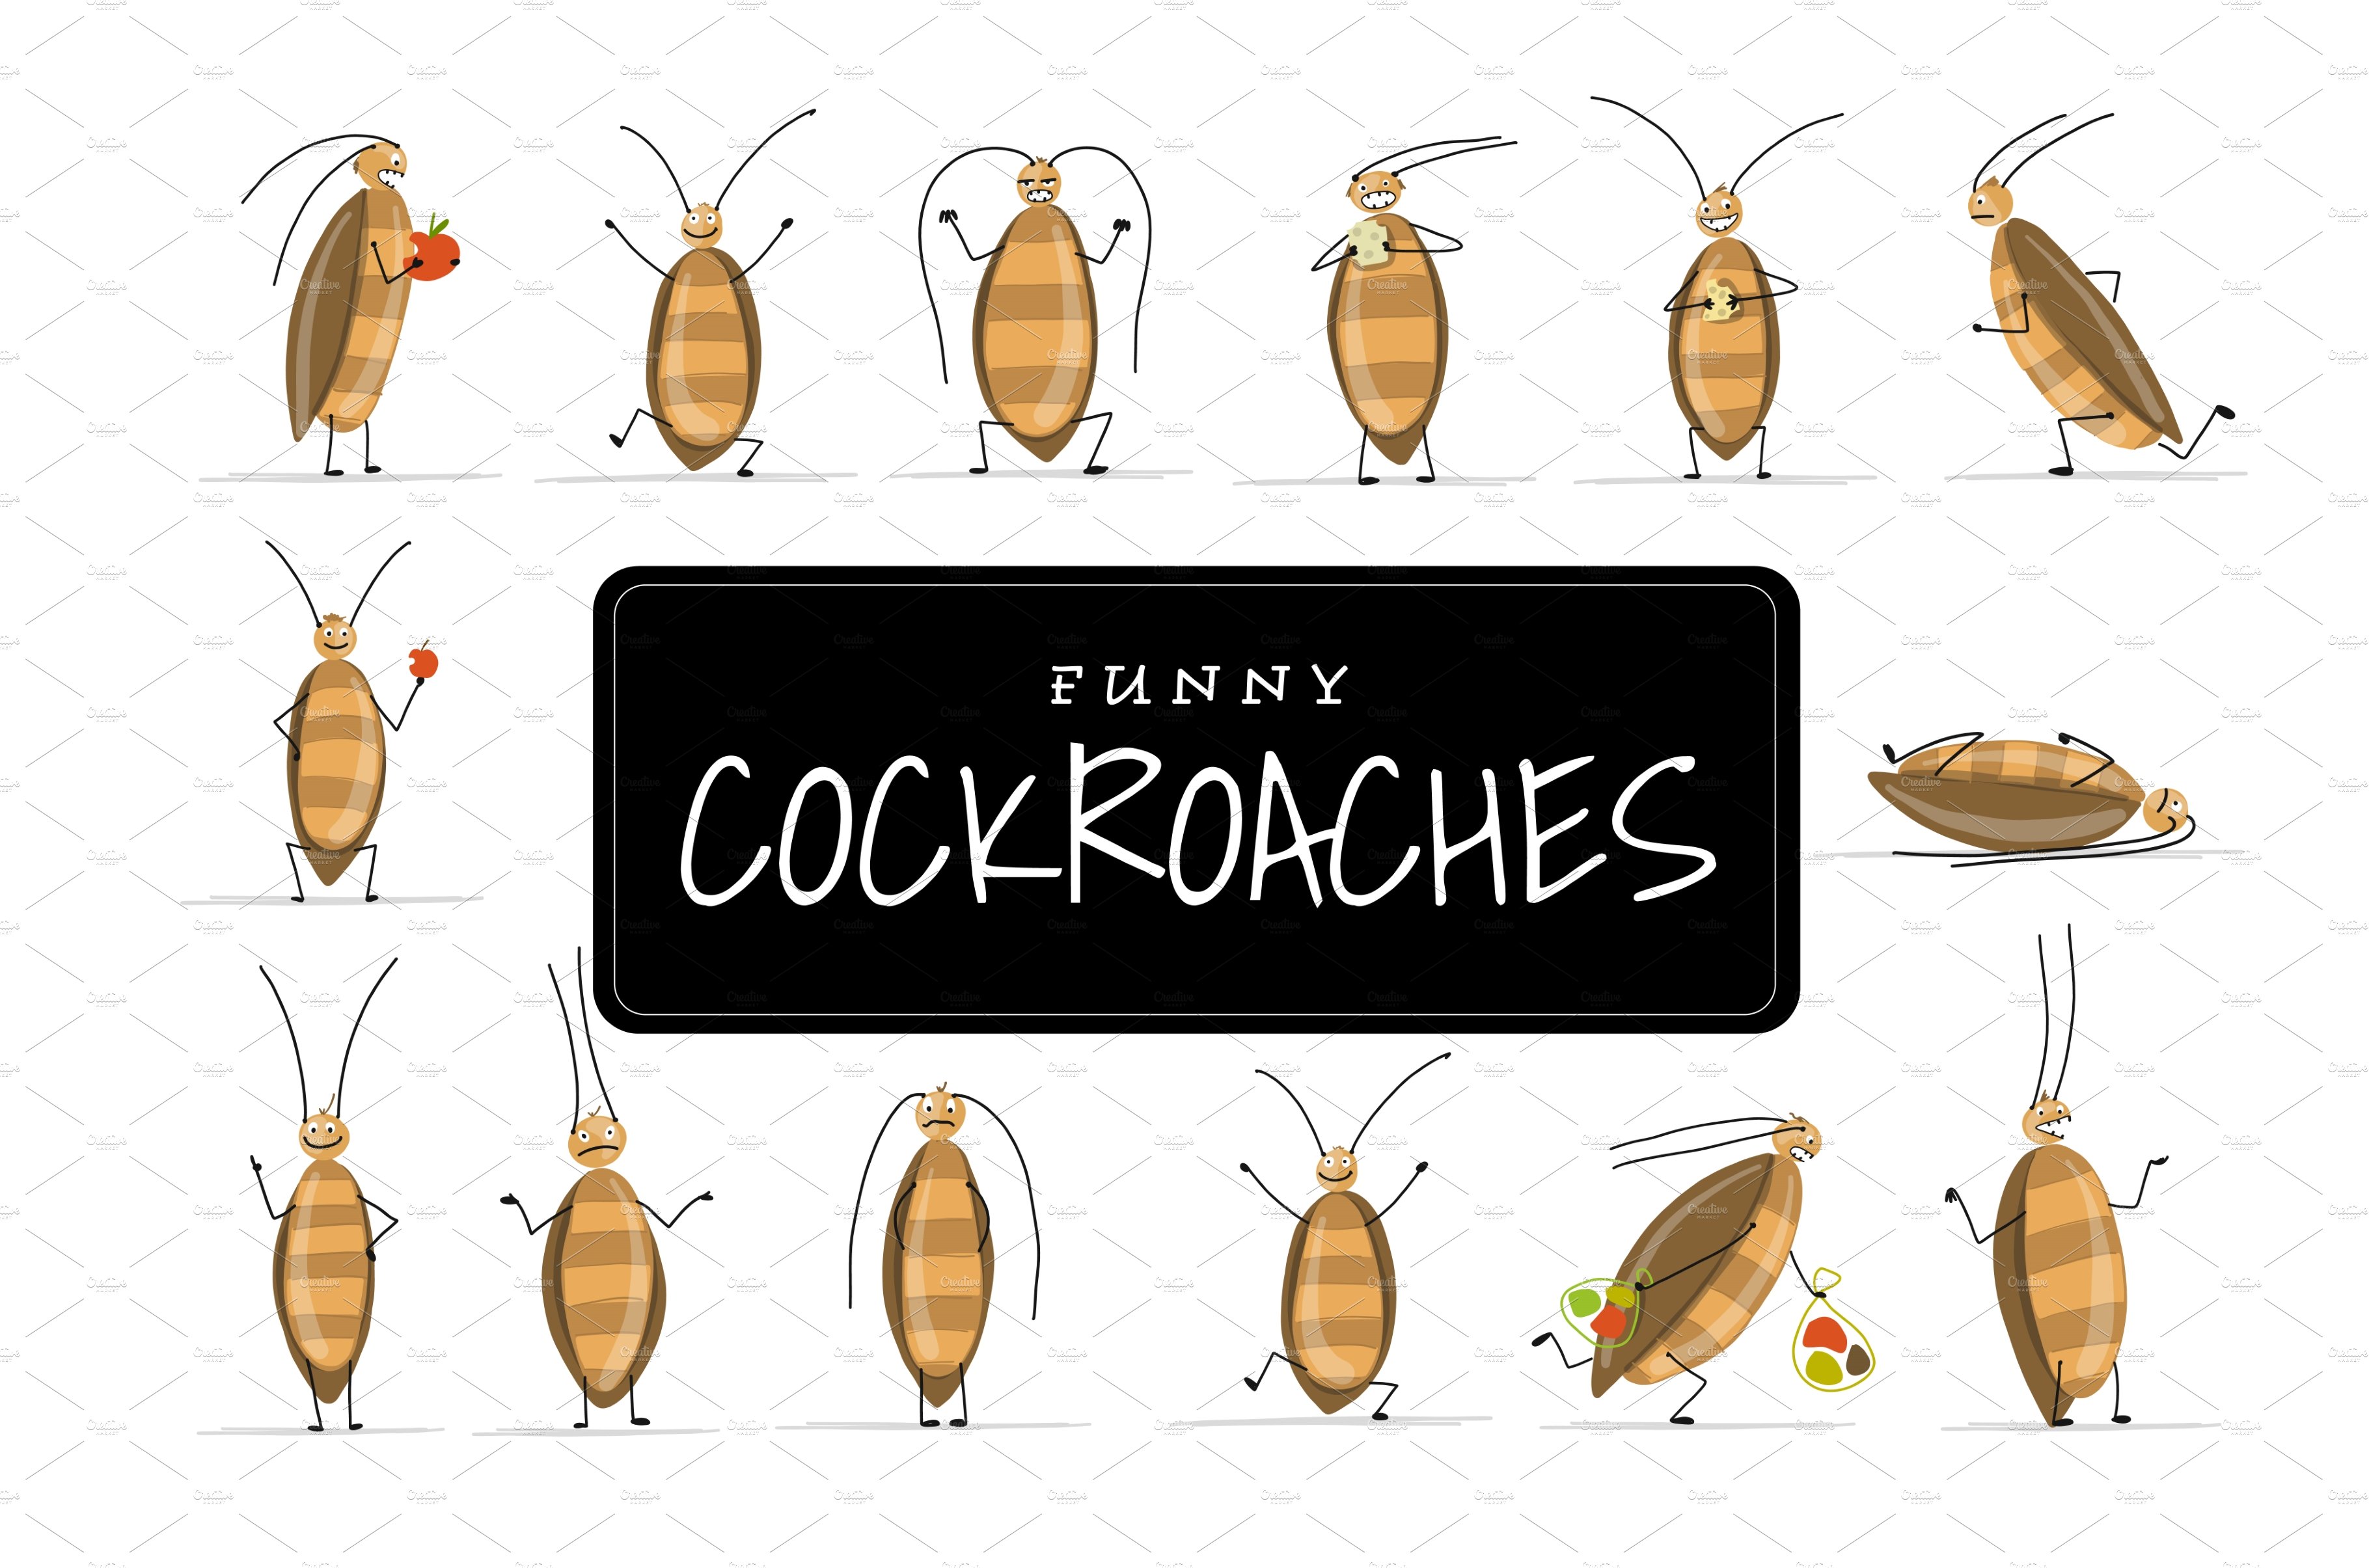 Funny cockroaches set for your cover image.